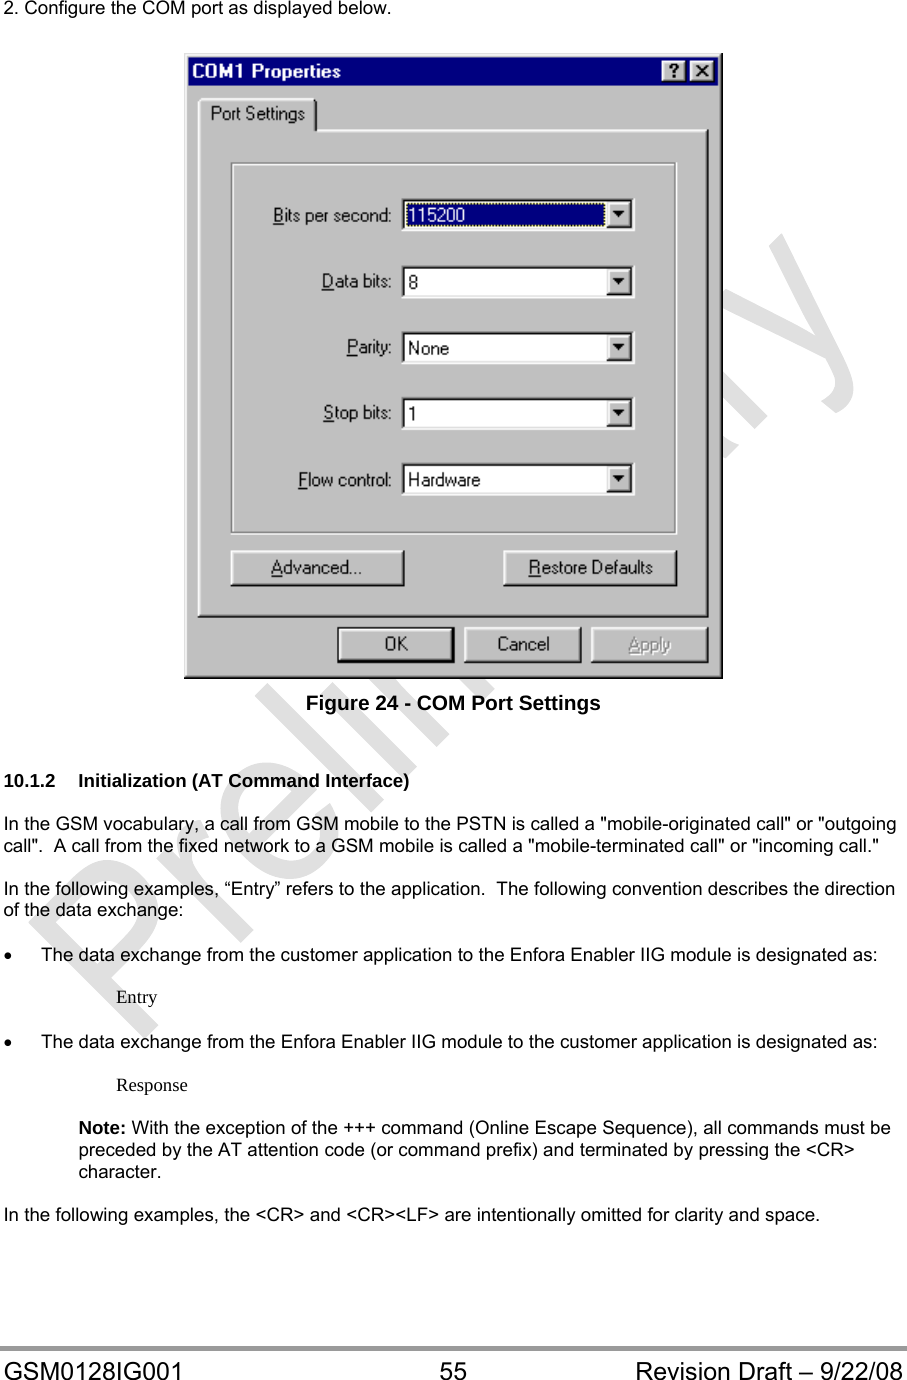  GSM0128IG001  55  Revision Draft – 9/22/08  2. Configure the COM port as displayed below.   Figure 24 - COM Port Settings   10.1.2  Initialization (AT Command Interface)  In the GSM vocabulary, a call from GSM mobile to the PSTN is called a &quot;mobile-originated call&quot; or &quot;outgoing call&quot;.  A call from the fixed network to a GSM mobile is called a &quot;mobile-terminated call&quot; or &quot;incoming call.&quot;  In the following examples, “Entry” refers to the application.  The following convention describes the direction of the data exchange:    The data exchange from the customer application to the Enfora Enabler IIG module is designated as:  Entry    The data exchange from the Enfora Enabler IIG module to the customer application is designated as:  Response  Note: With the exception of the +++ command (Online Escape Sequence), all commands must be preceded by the AT attention code (or command prefix) and terminated by pressing the &lt;CR&gt; character.  In the following examples, the &lt;CR&gt; and &lt;CR&gt;&lt;LF&gt; are intentionally omitted for clarity and space.  